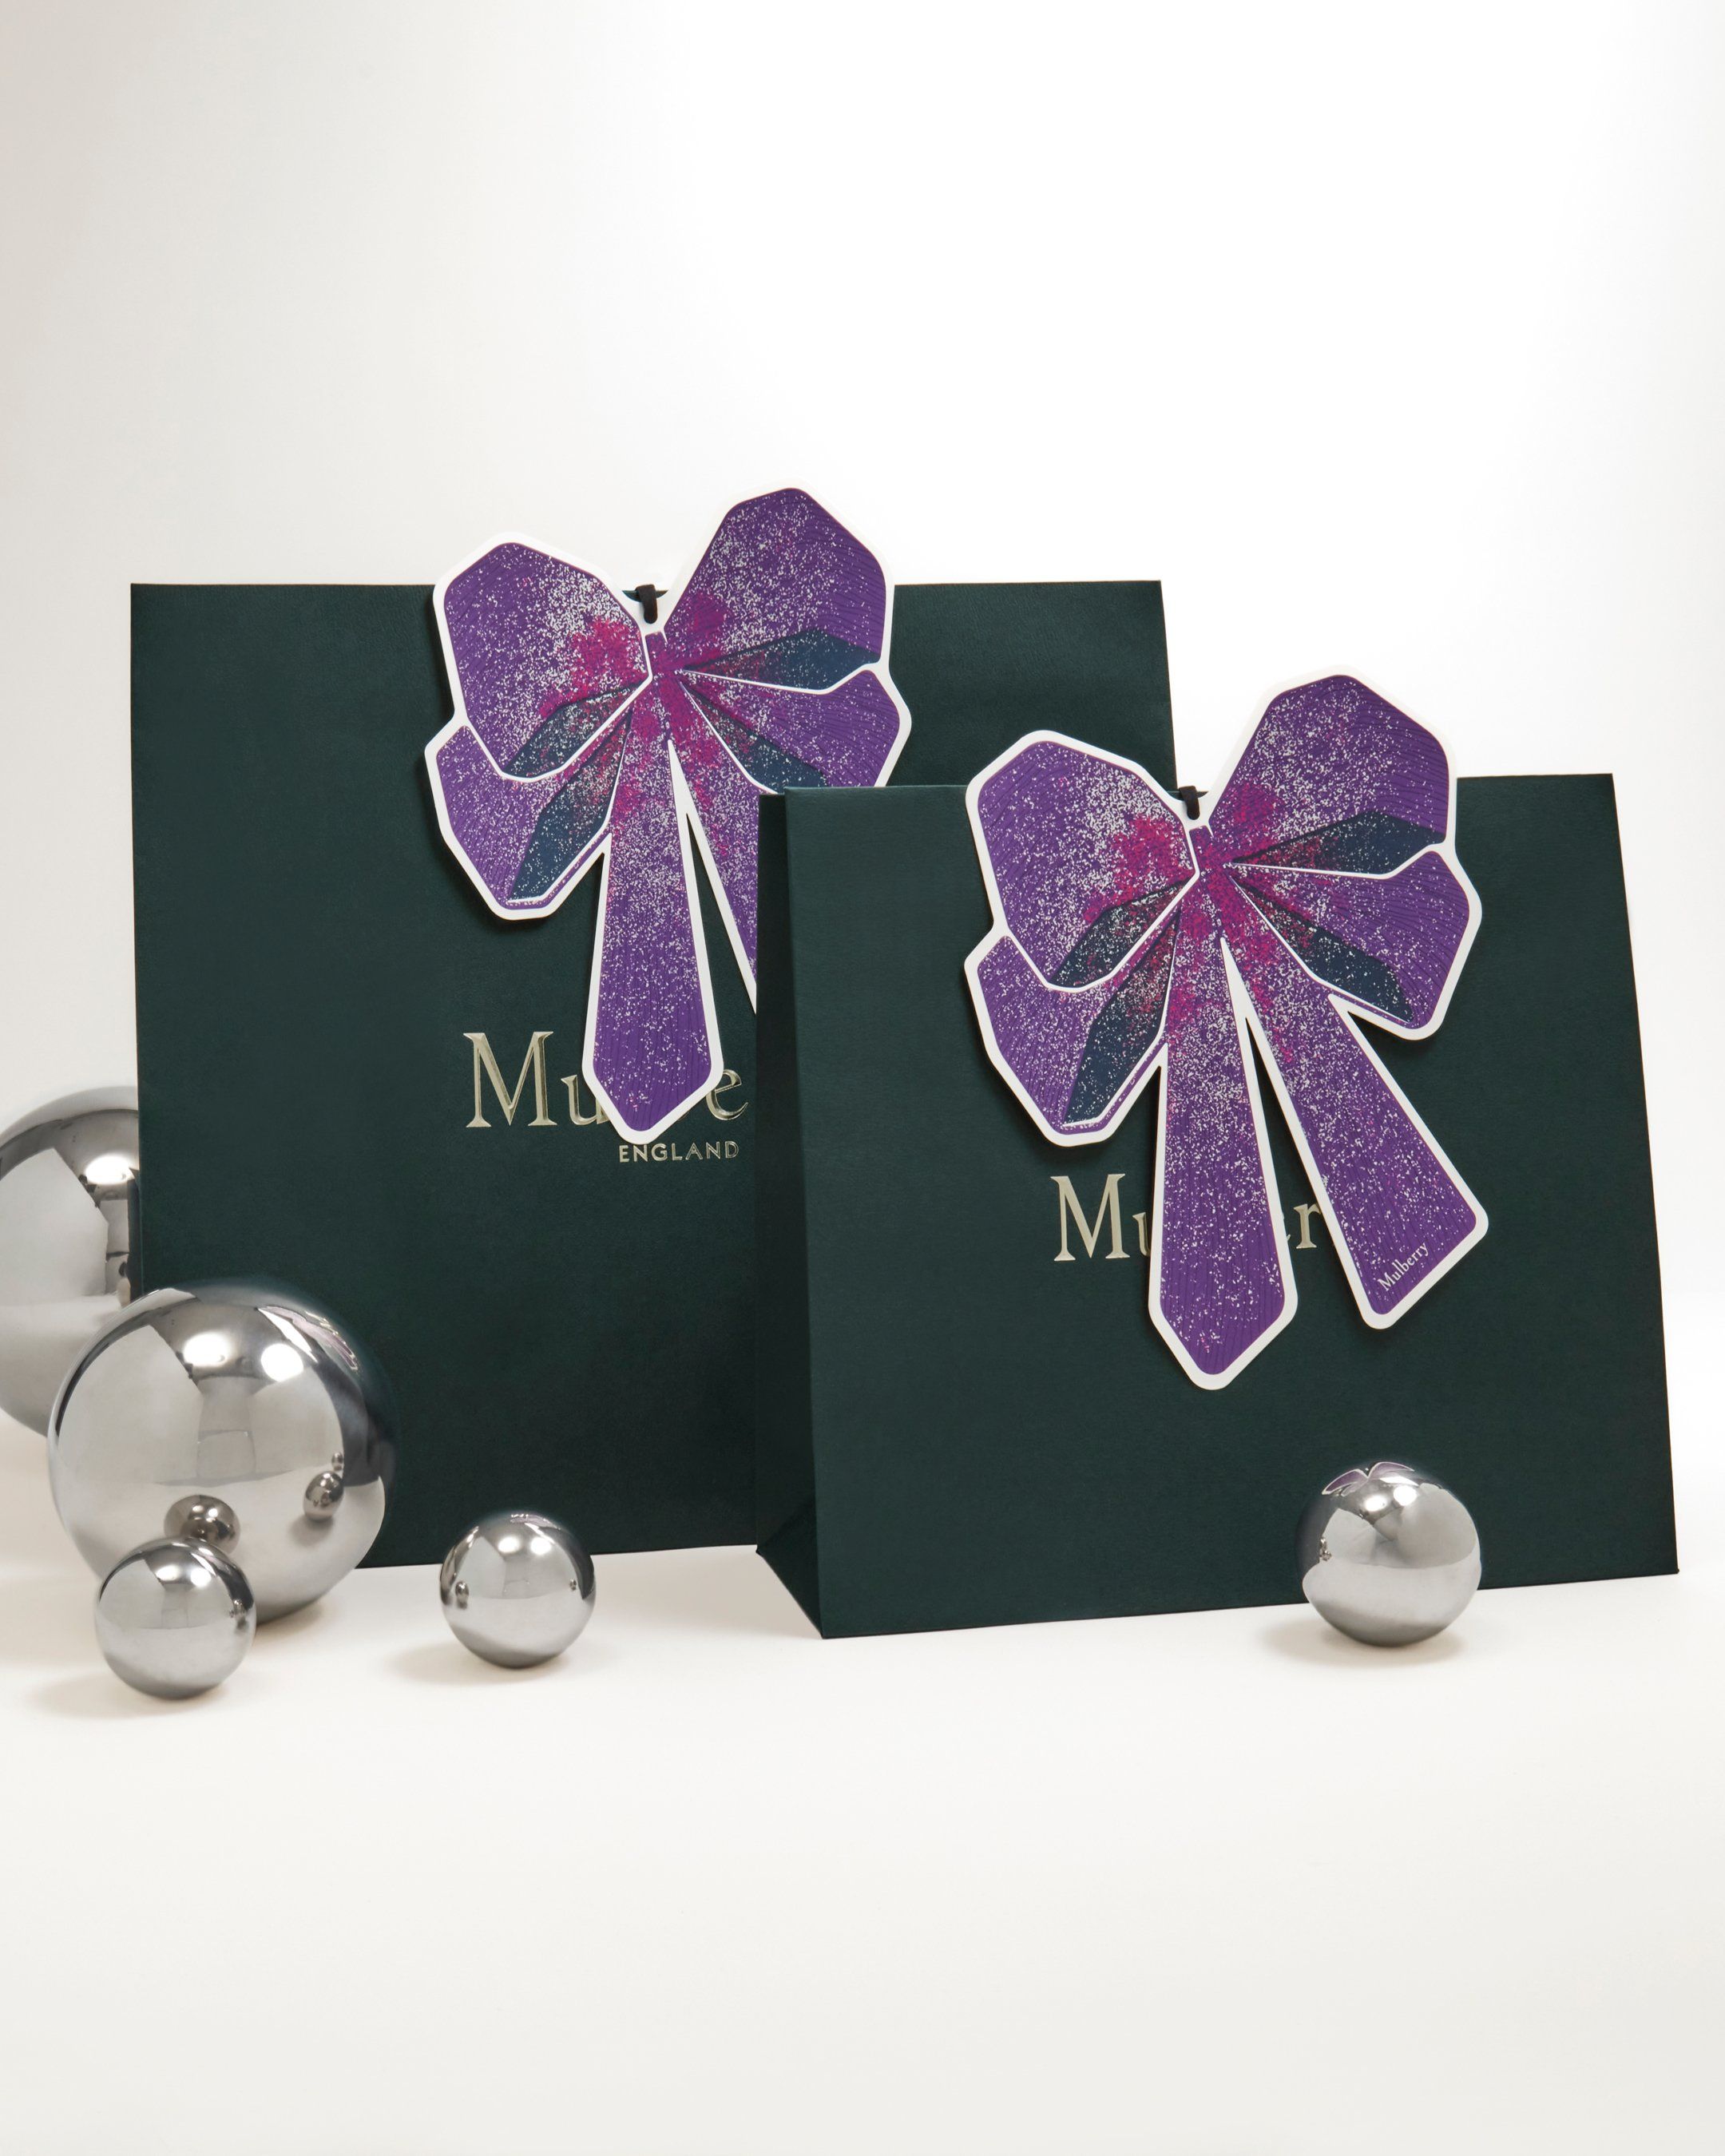 Mulberry packaging with purple bow